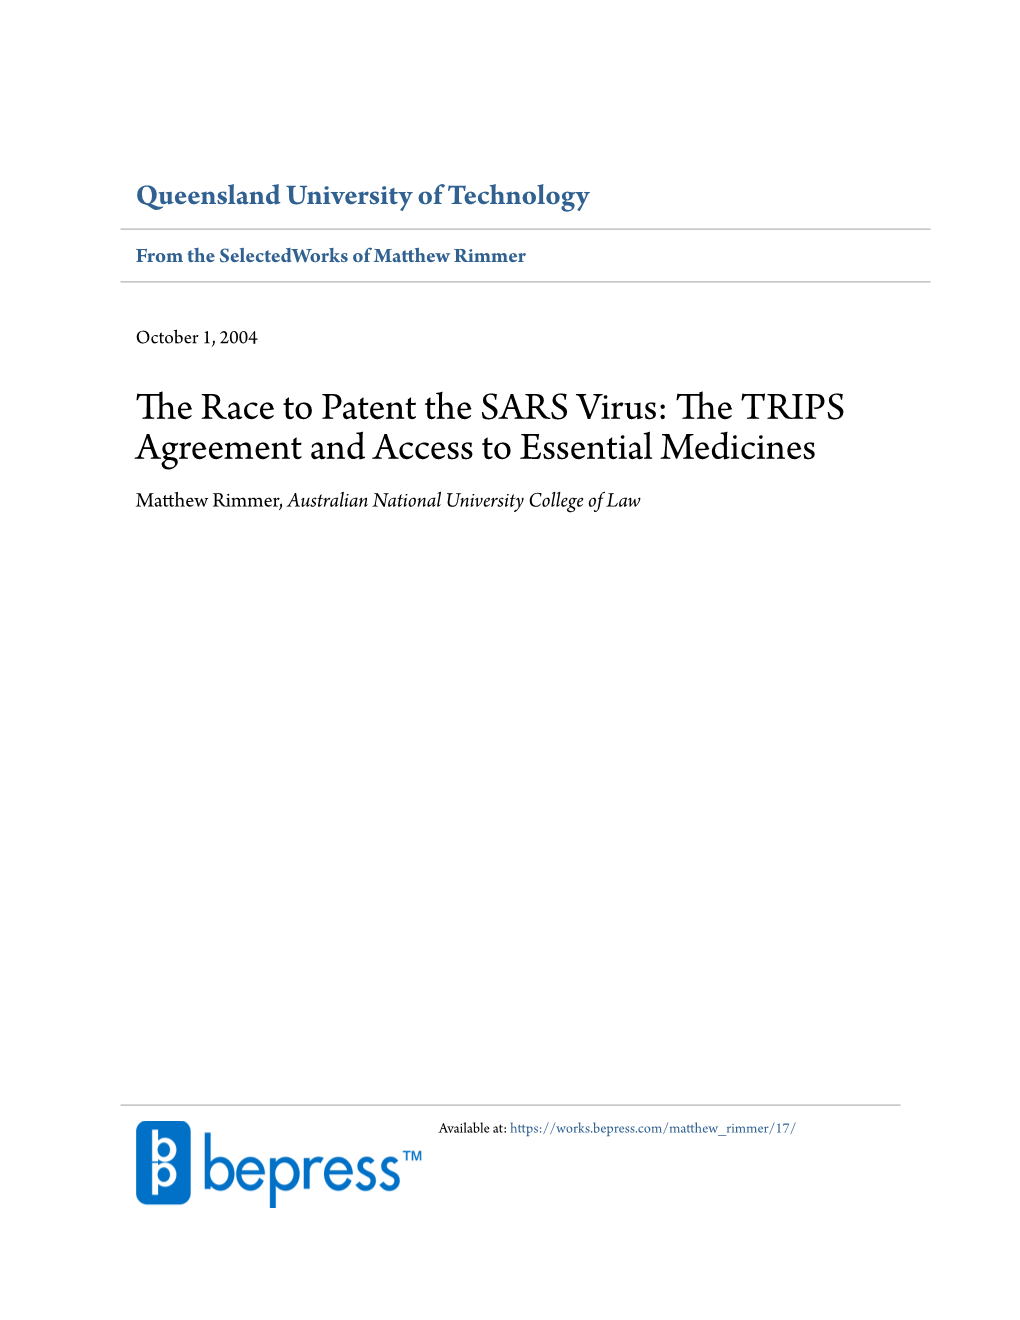 The TRIPS Agreement and Access to Essential Medicines Matthew Rimmer, Australian National University College of Law